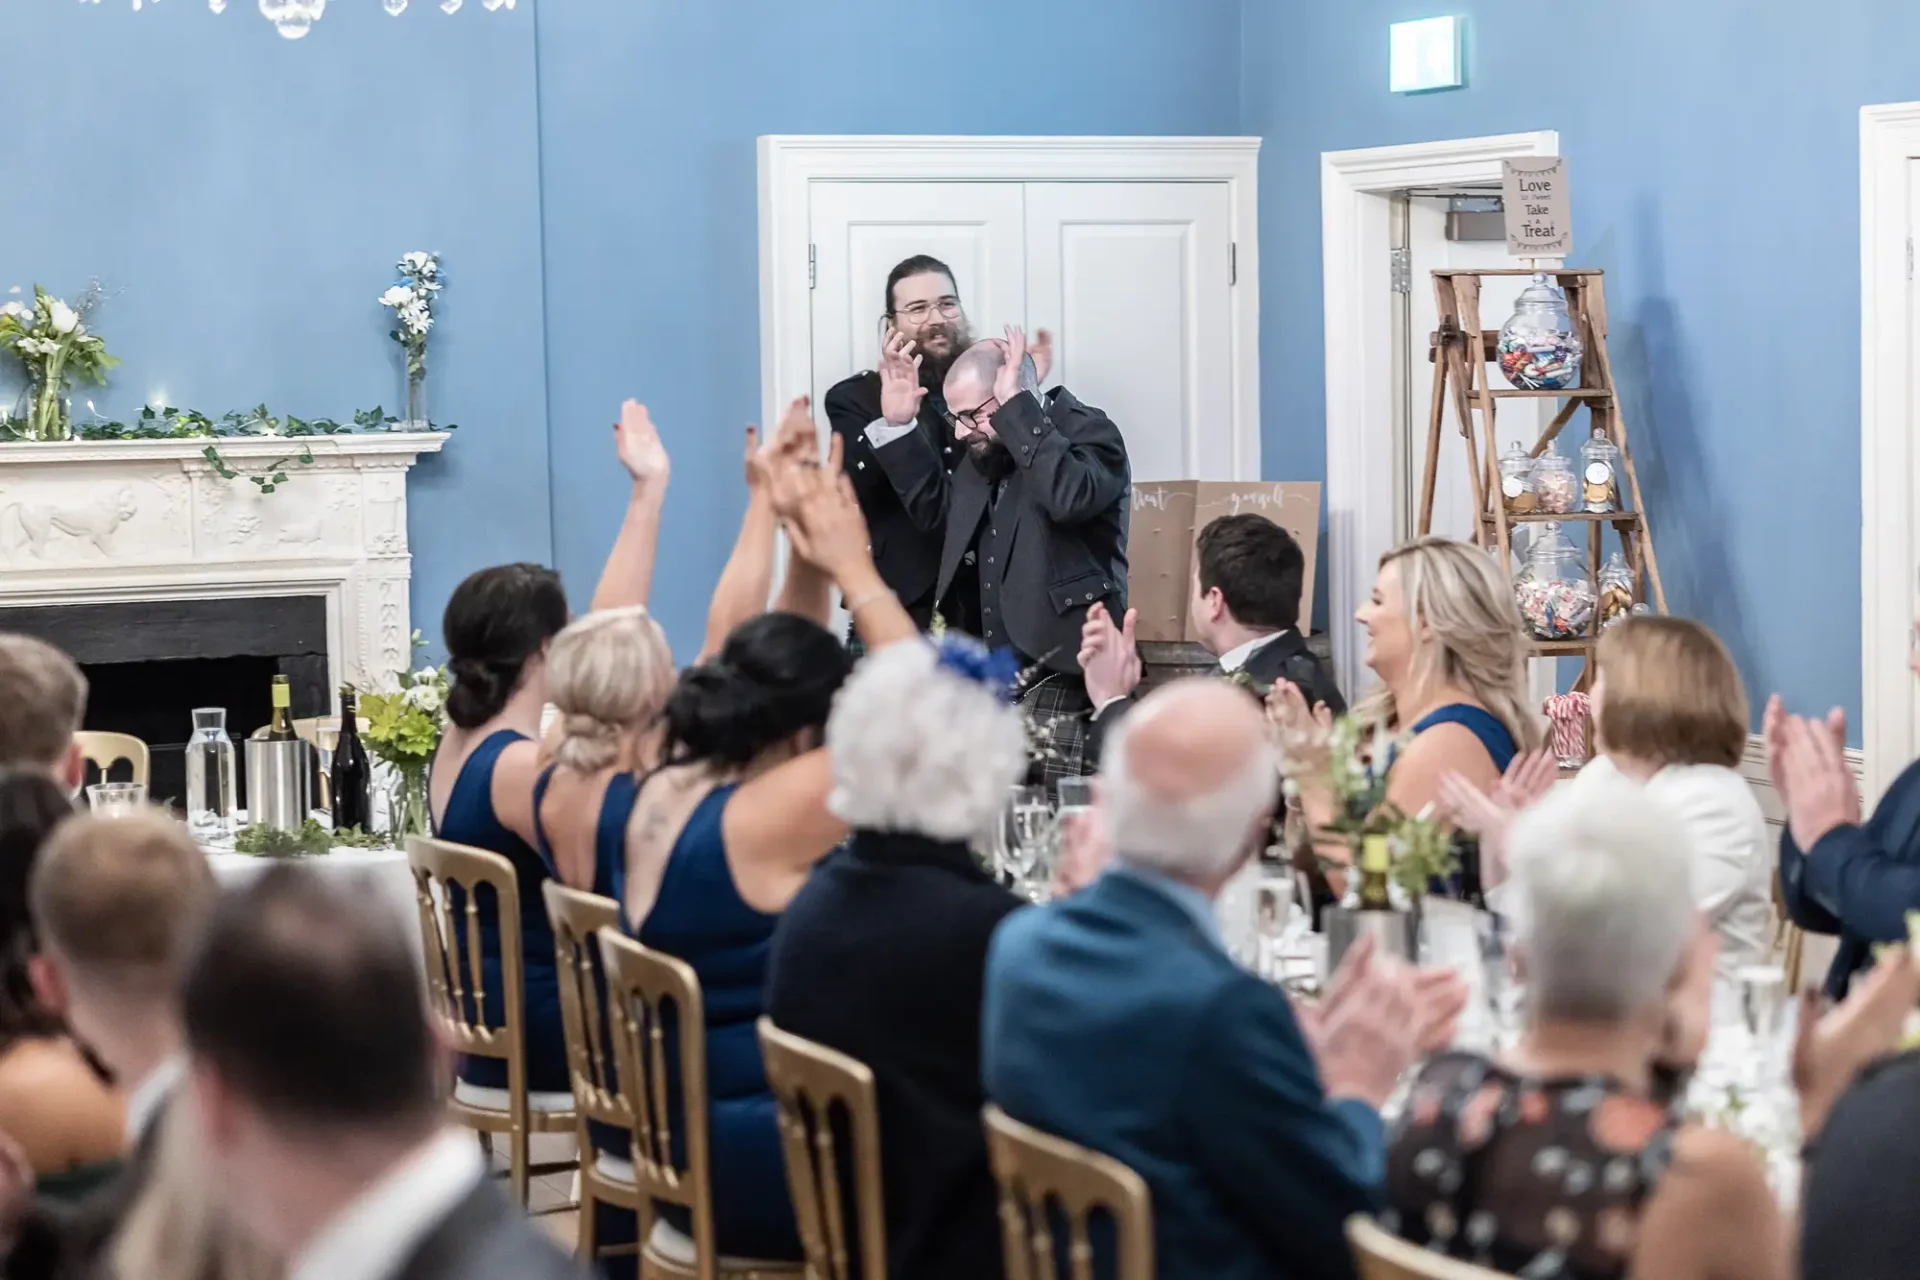 A man giving a speech at a wedding reception, holding a microphone and a glass, with guests seated around tables applauding.